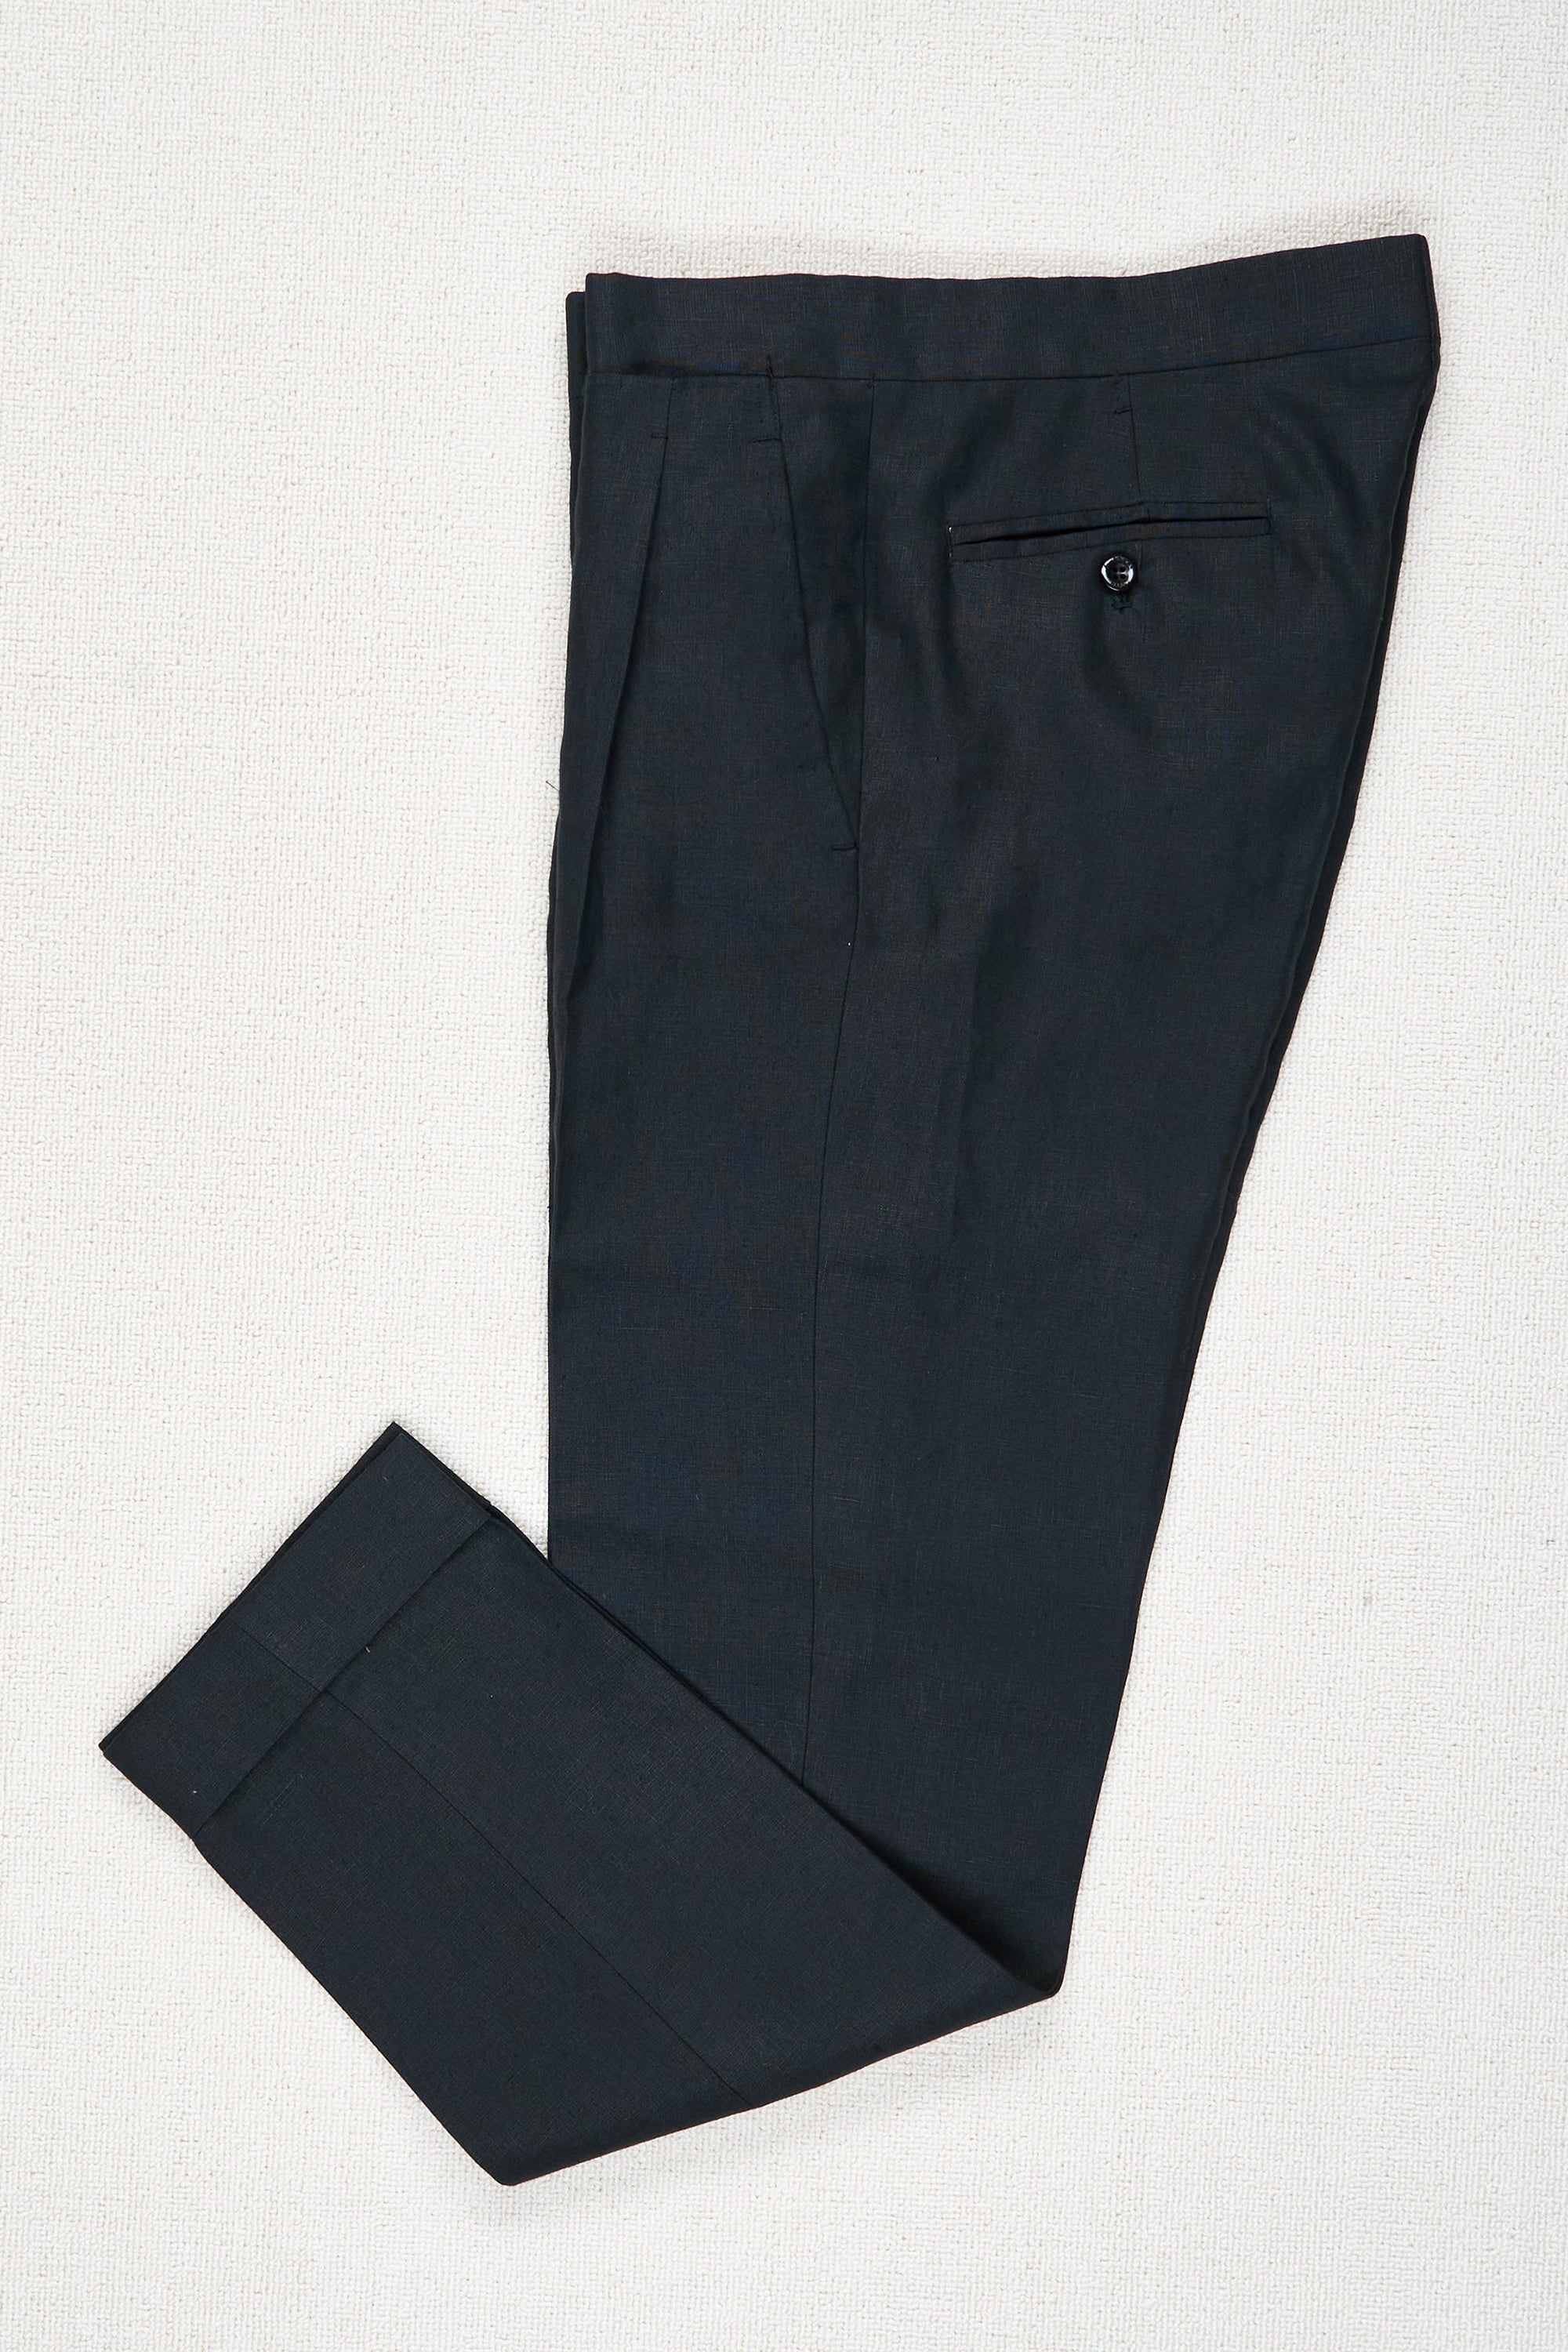 Mens LT99 Black / Navy Single Pleat Trouser - Armstrong Aviation Clothing